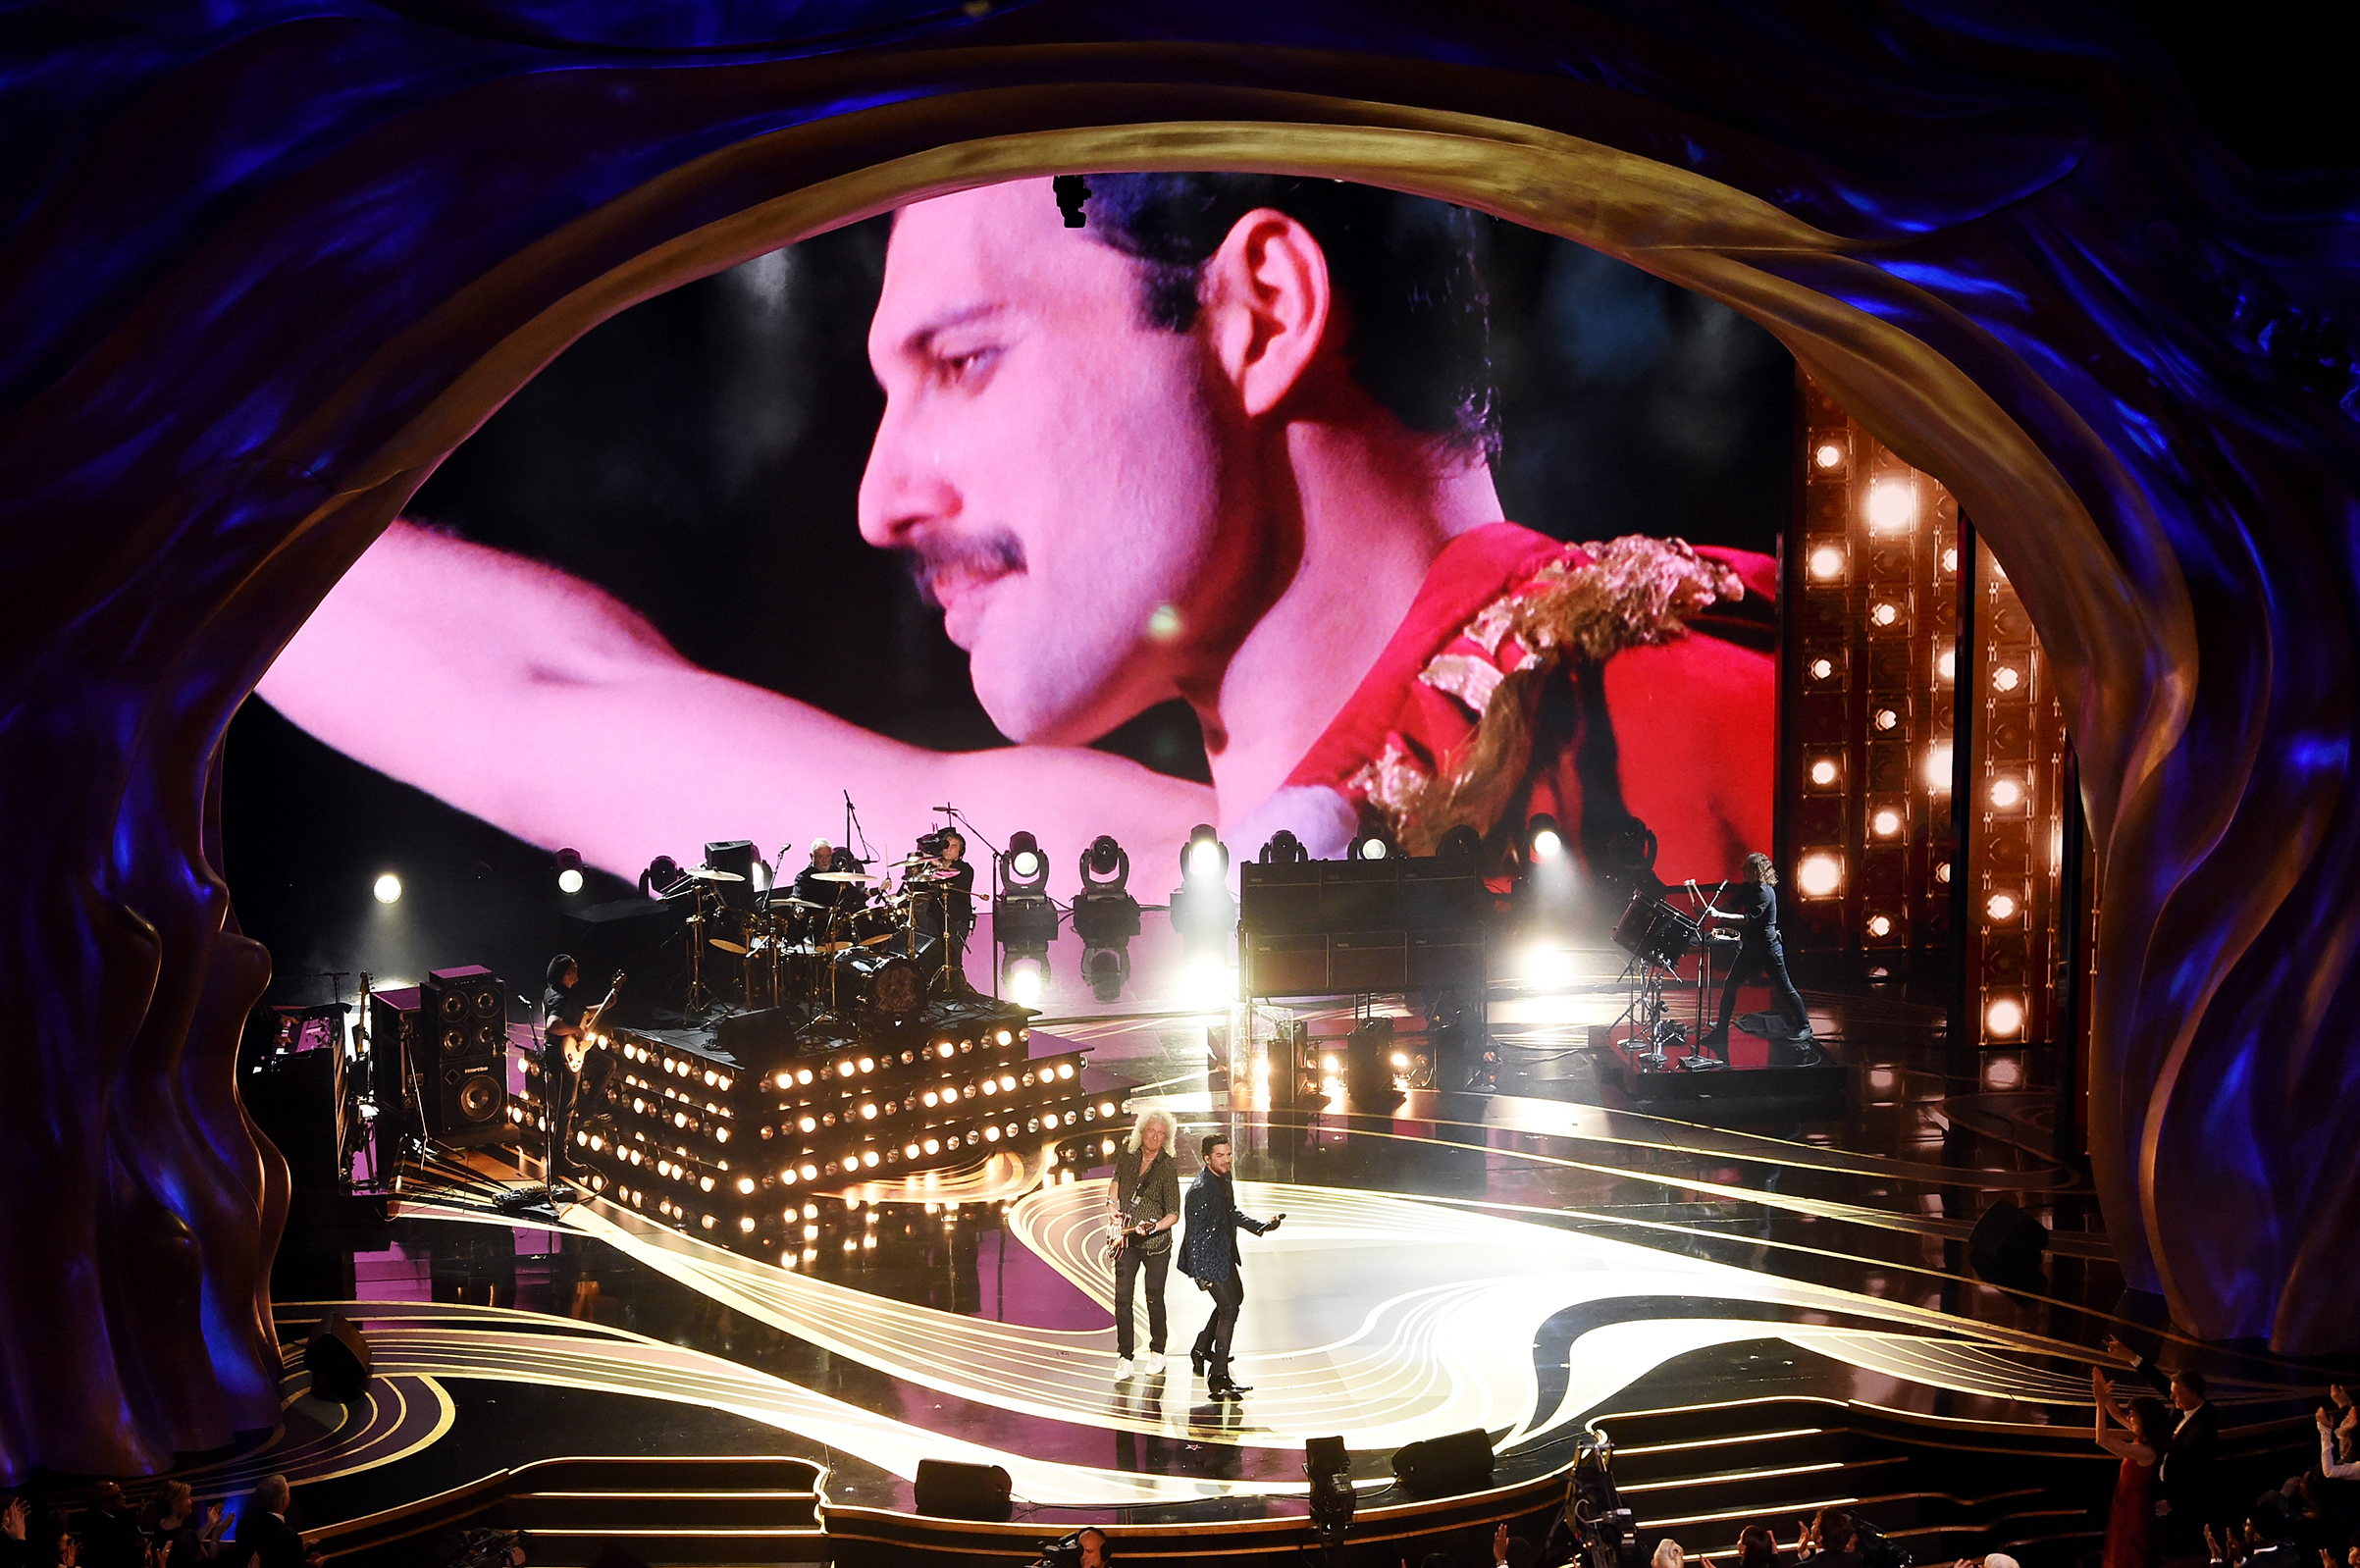 An image of the late Freddie Mercury is projected onto a screen while Adam Lambert + Queen perform onstage during the 91st Annual Academy Awards at Dolby Theatre on Feb. 24, 2019. (Kevin Winter—Getty Images)